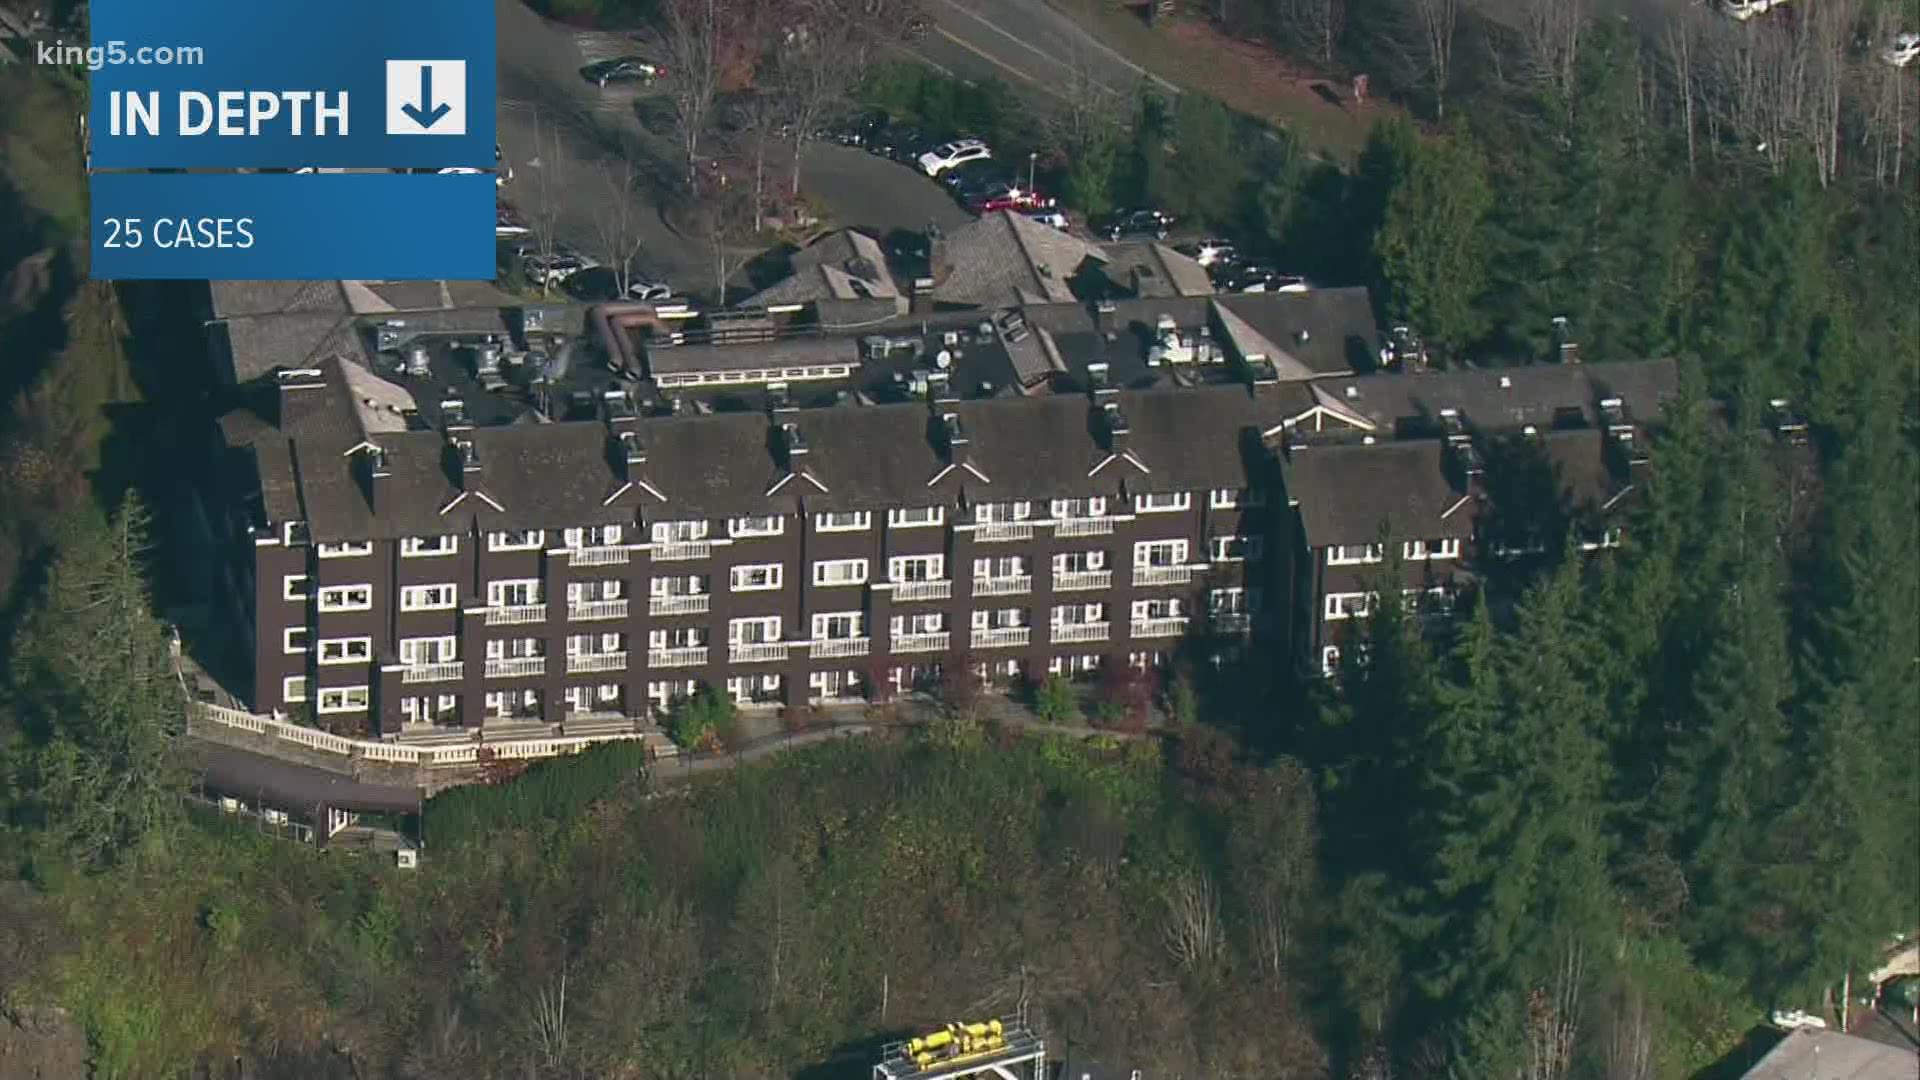 At least 25 cases are connected to a COVID-19 outbreak at the Salish Lodge & Spa in Snoqualmie, including 23 staff members and two guests.